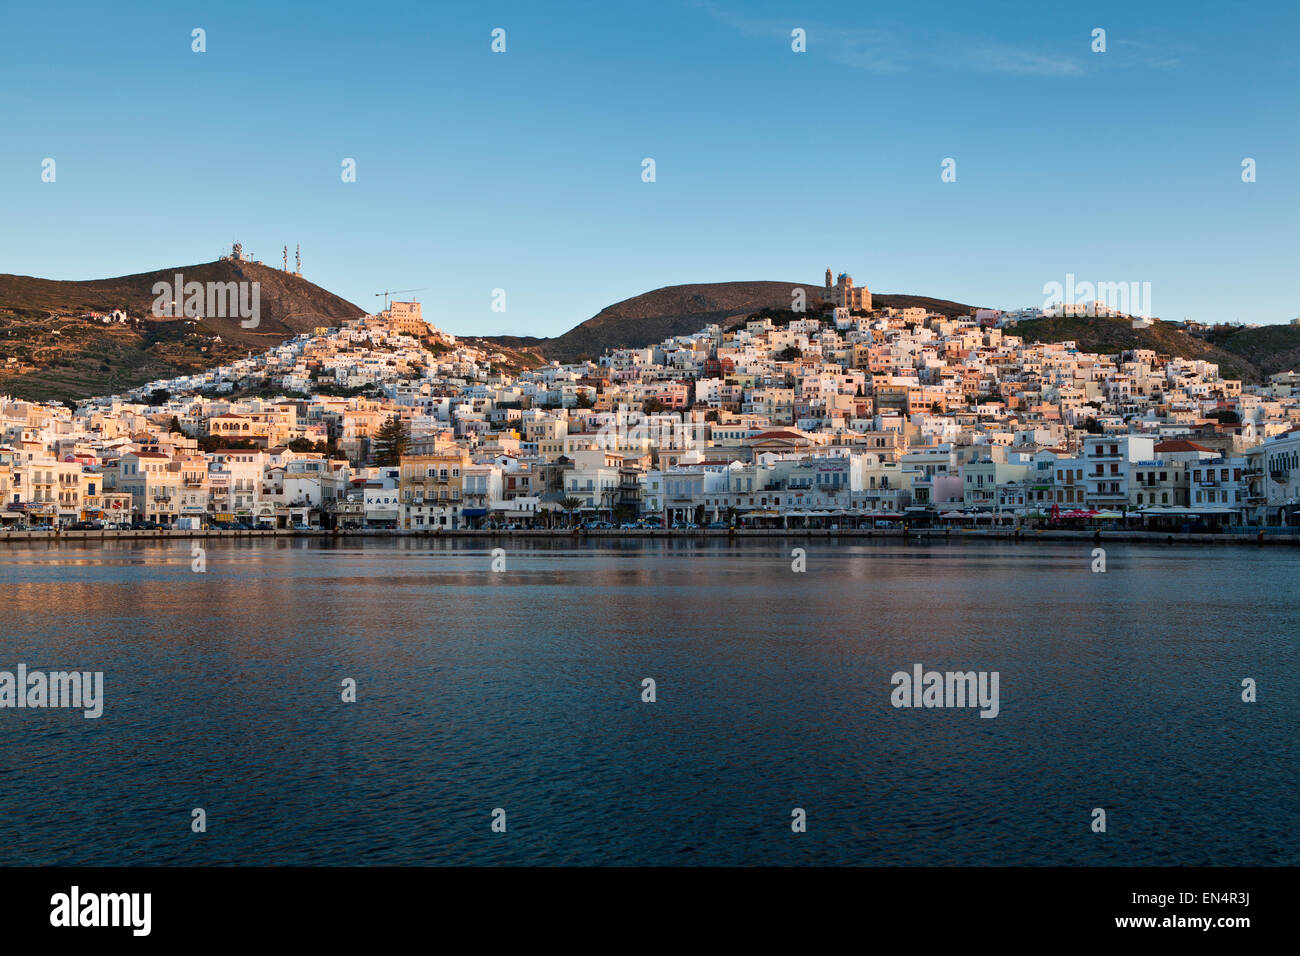 The port town of Ermoupolis in Syros in the Greek Islands. Stock Photo